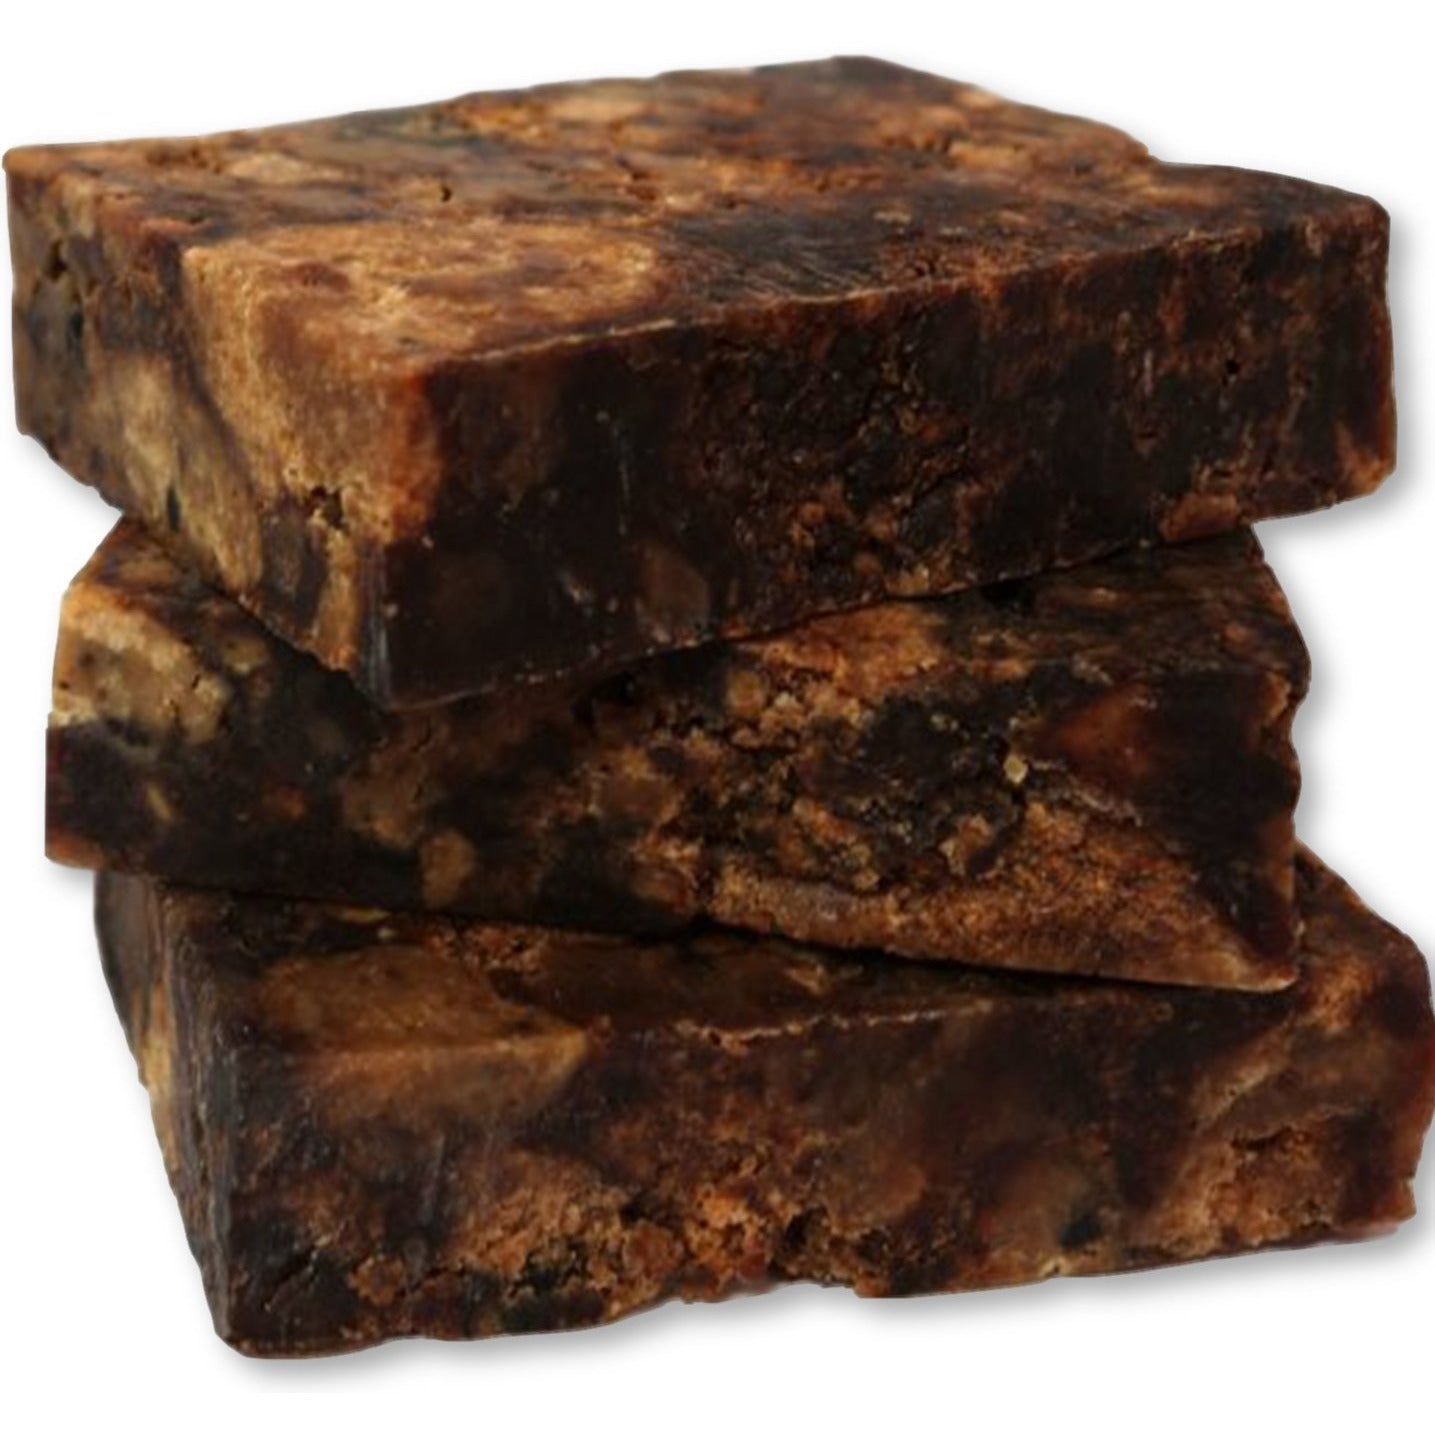 pure african black soap